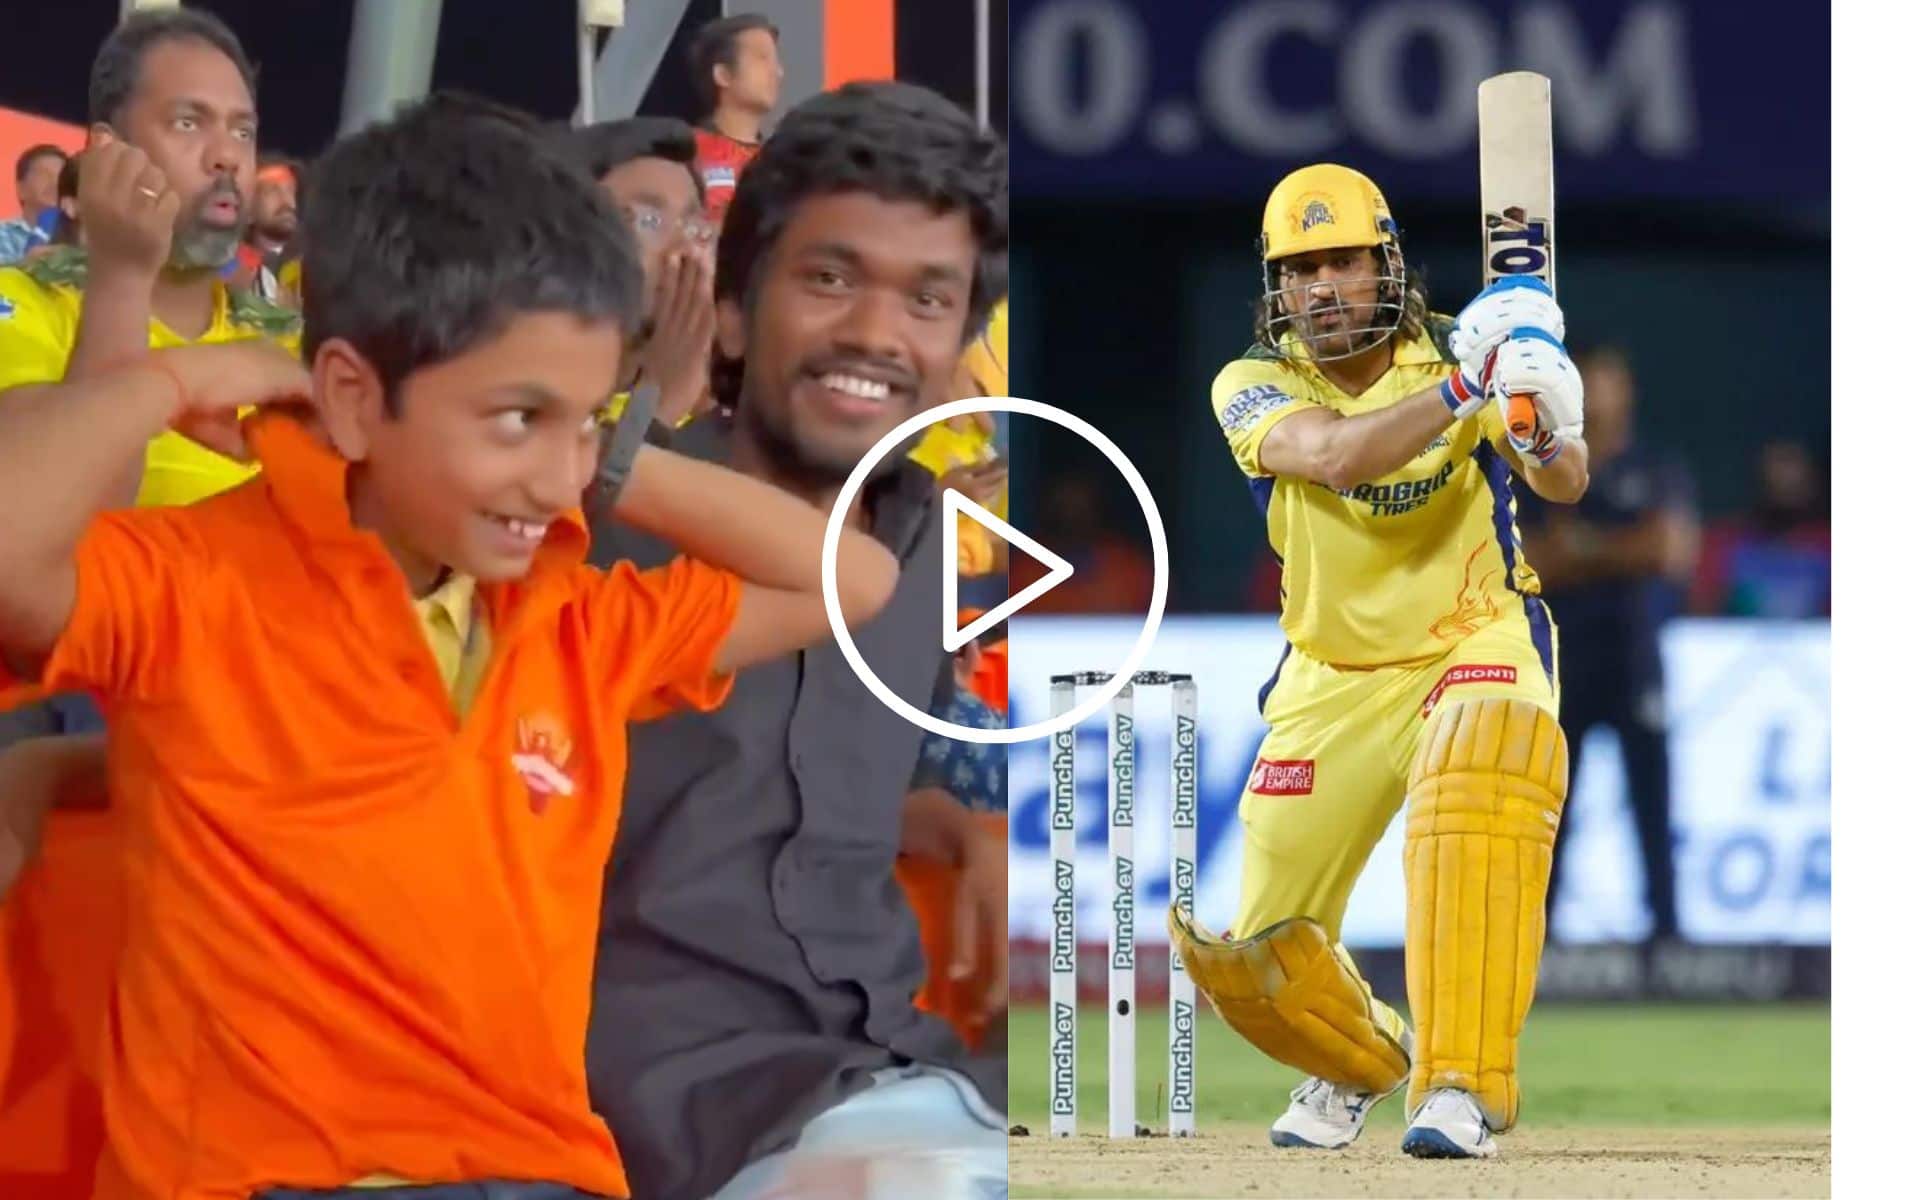 [Watch] Kid 'Switches' Jerseys In No Time During CSK Vs SRH Clash